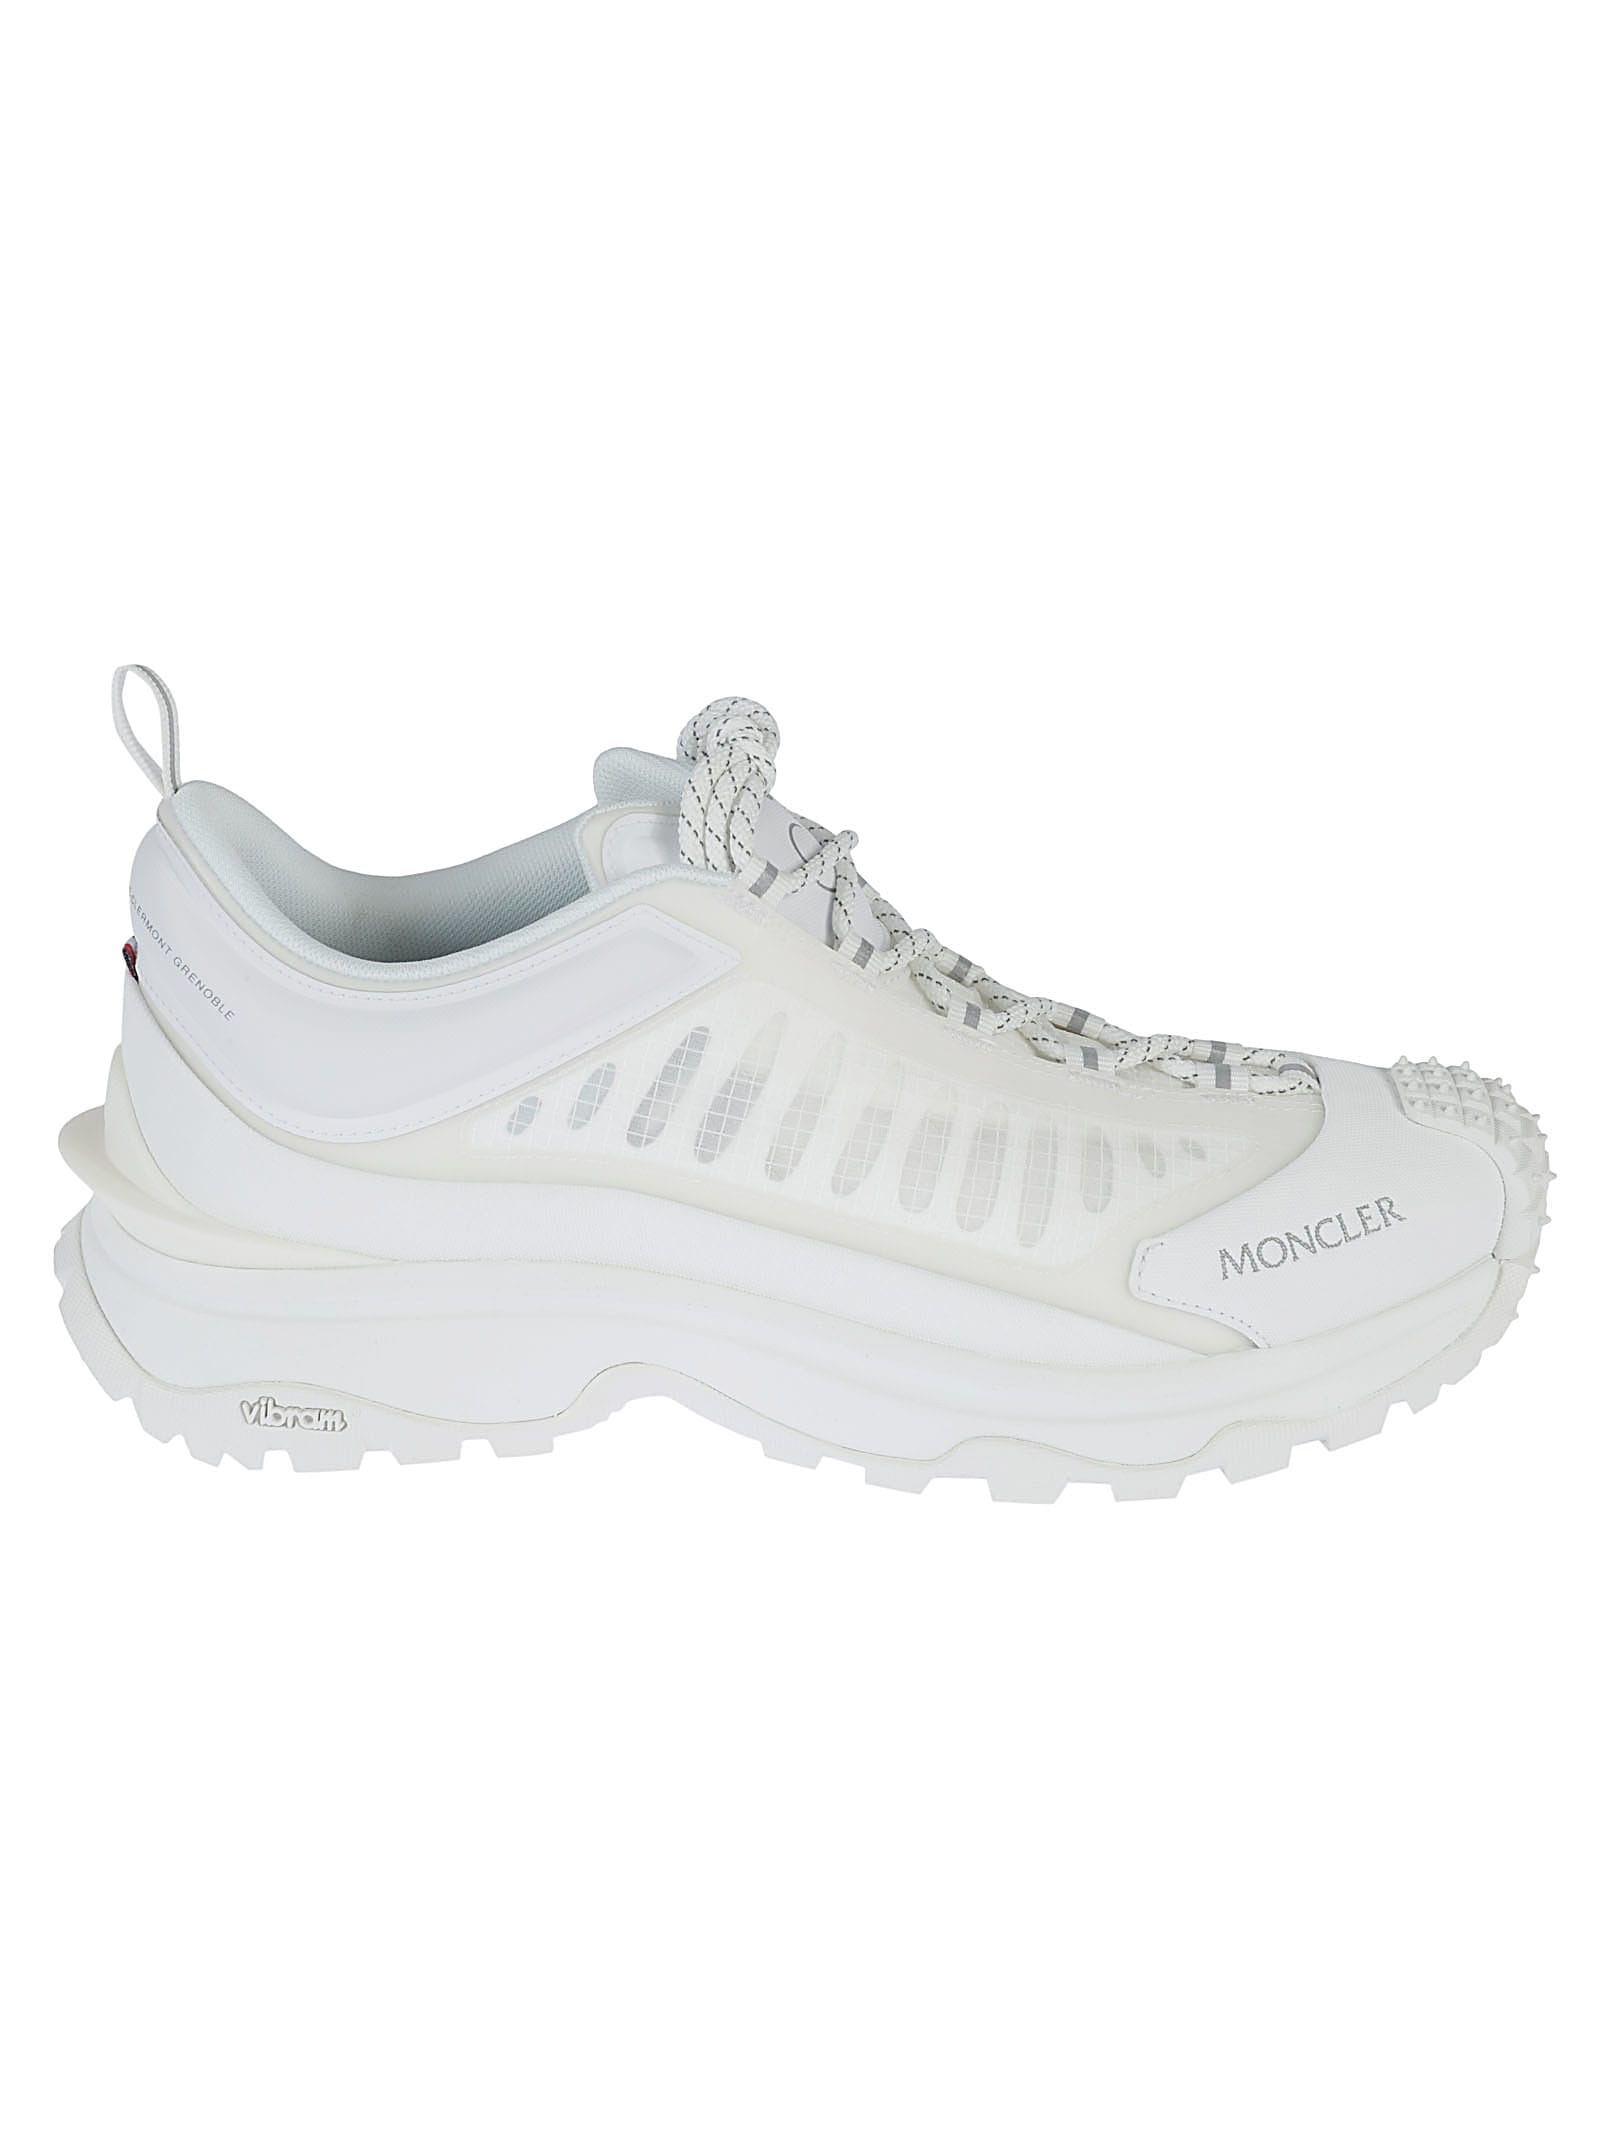 MONCLER TRAILGRIL LITE SNEAKERS